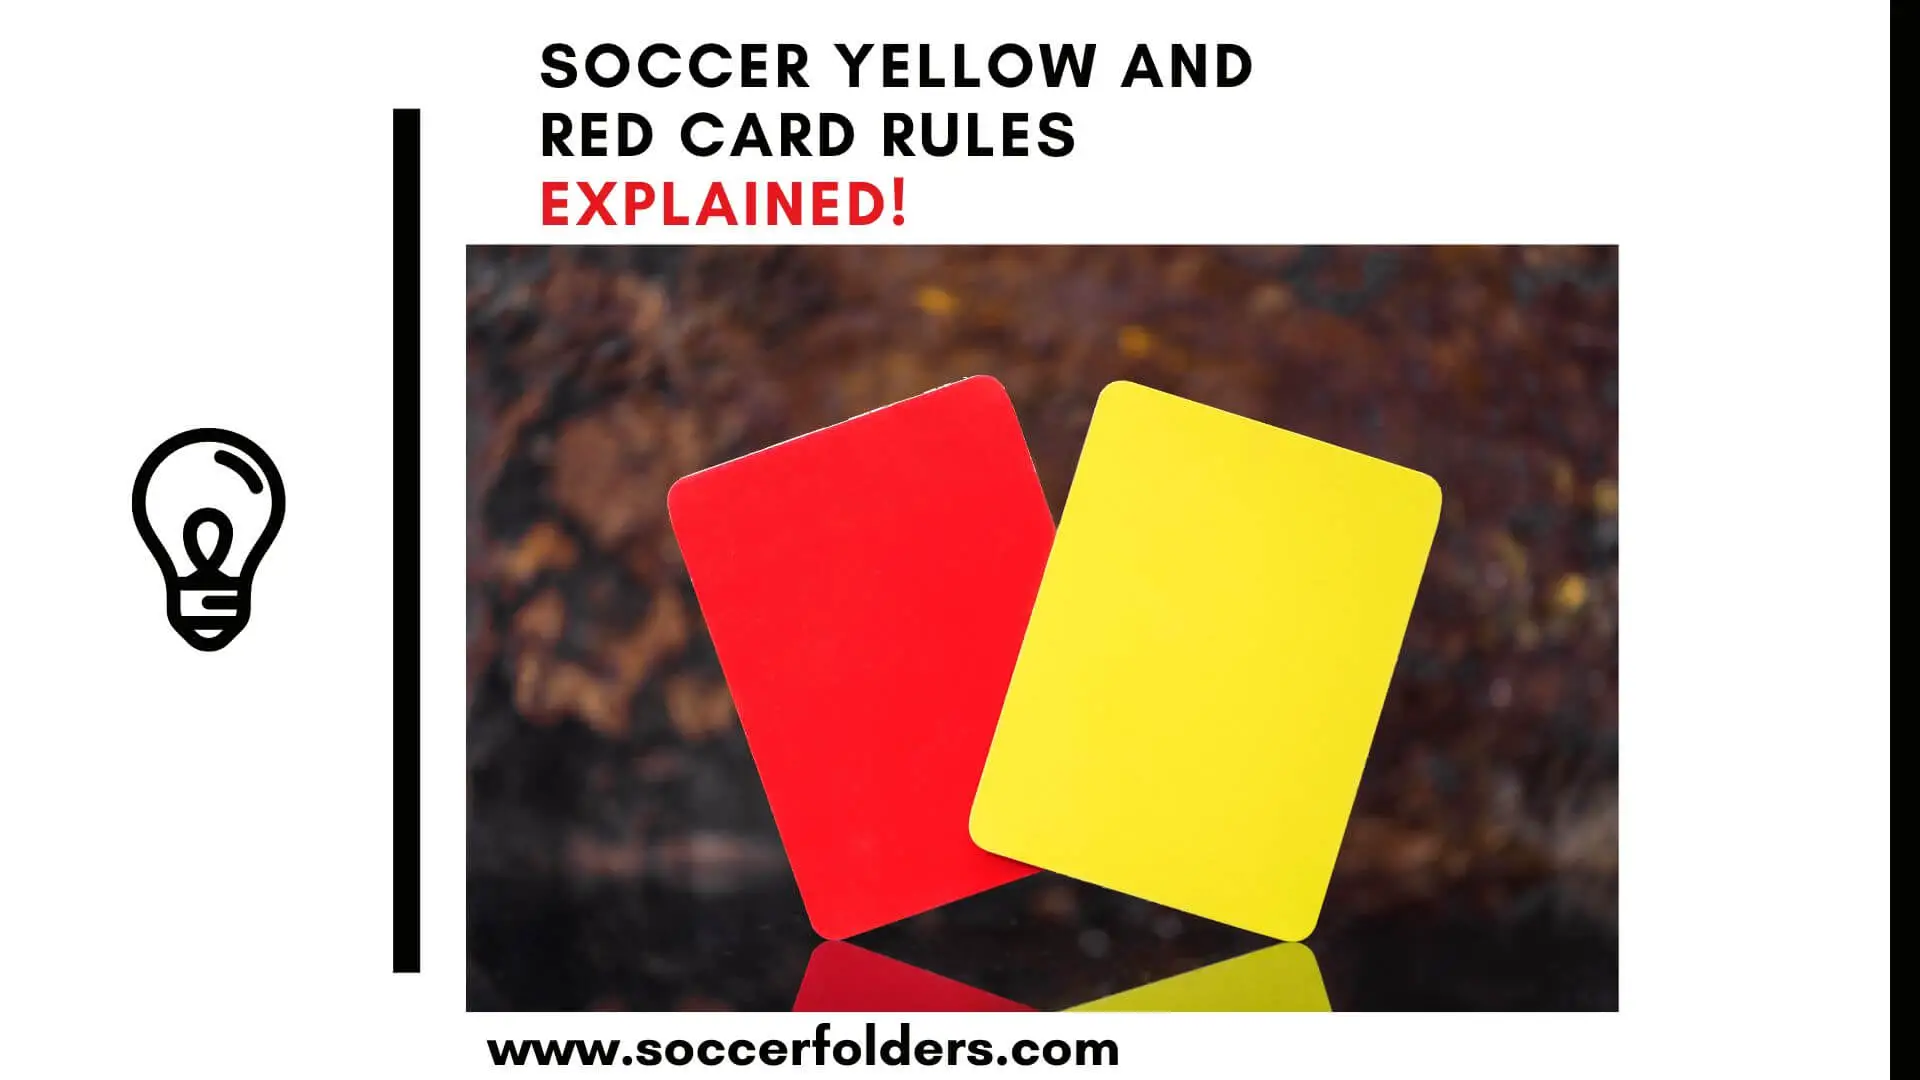 soccer yellow and red cards rules - Featured image